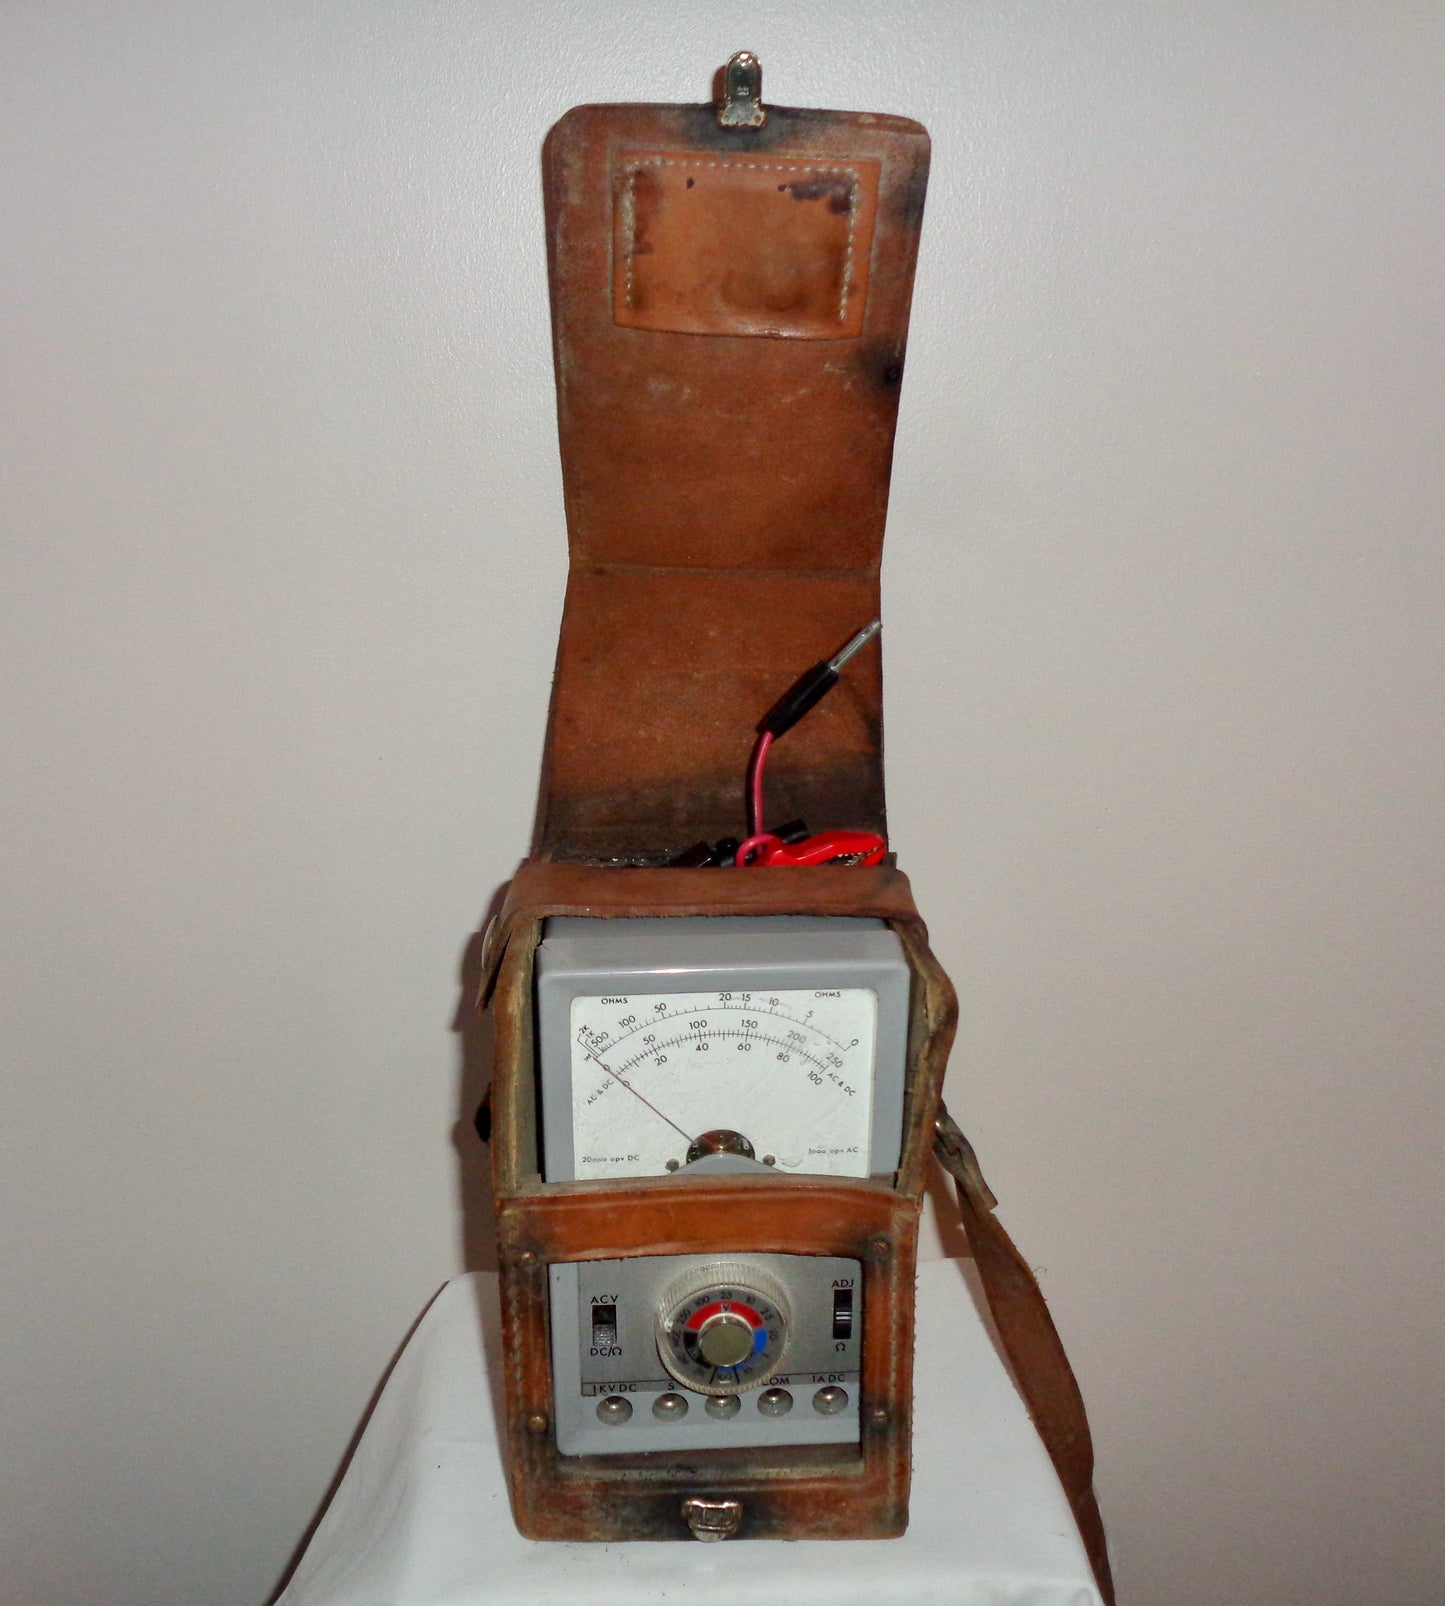 Post Office Multirange Meter Model 12C/1 Includes Leather Case & Leads